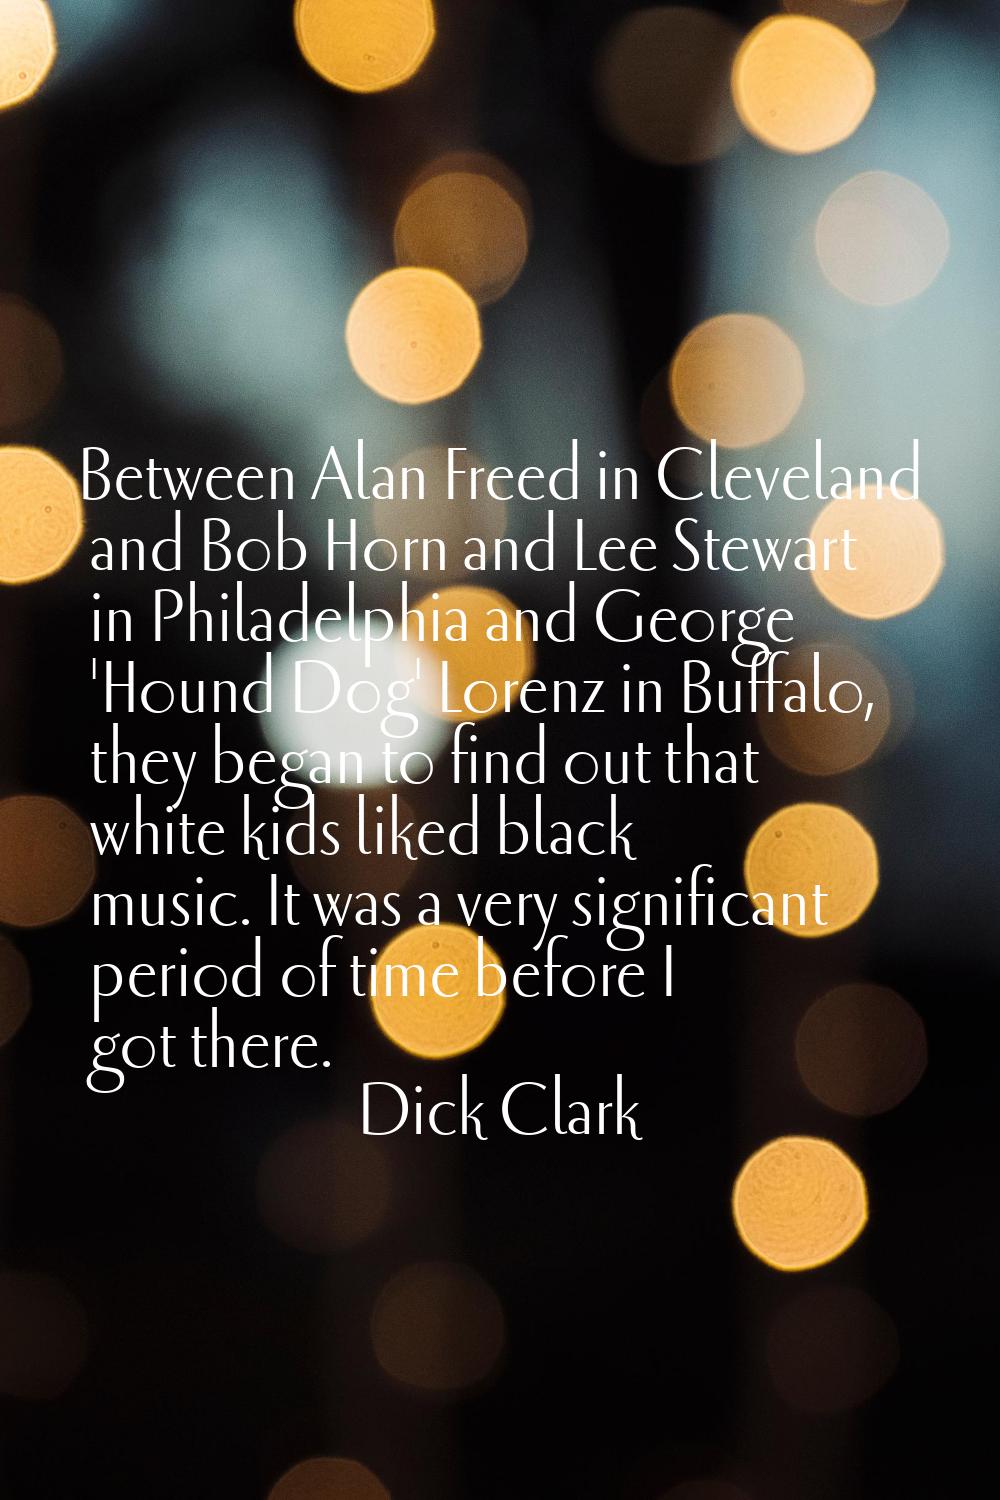 Between Alan Freed in Cleveland and Bob Horn and Lee Stewart in Philadelphia and George 'Hound Dog'